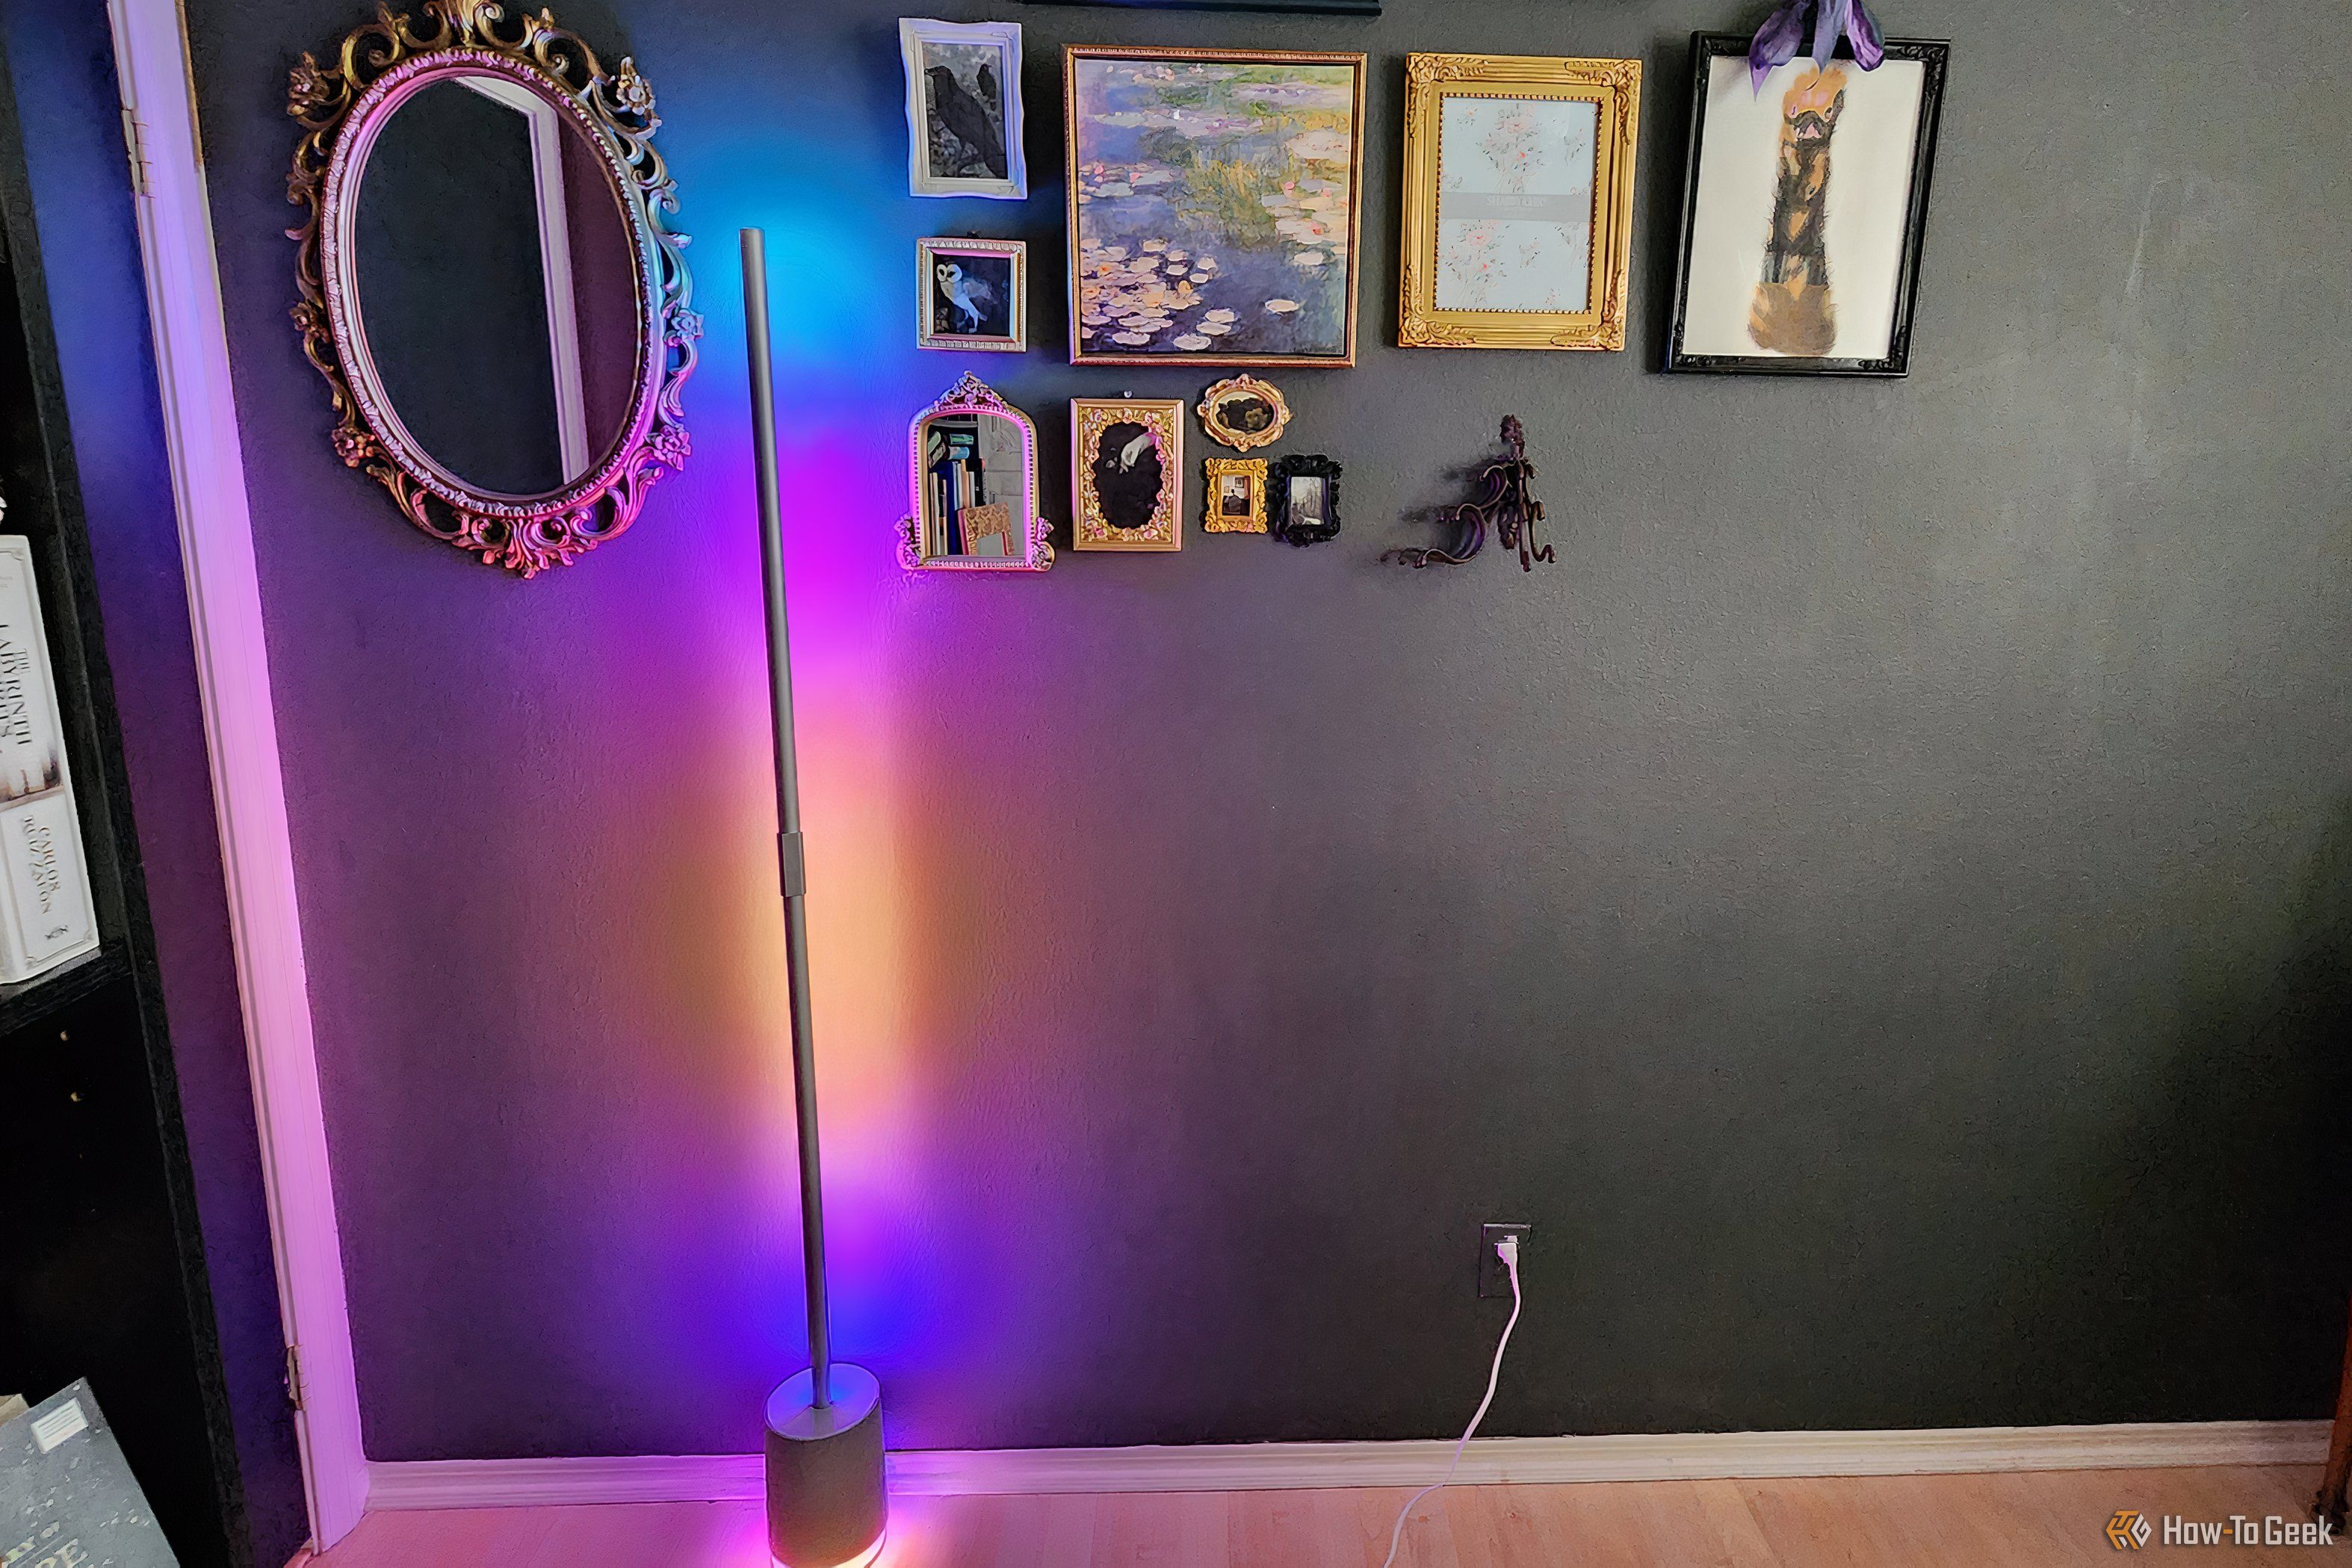 The Govee Floor Lamp Pro set to a multicolor scene setting.